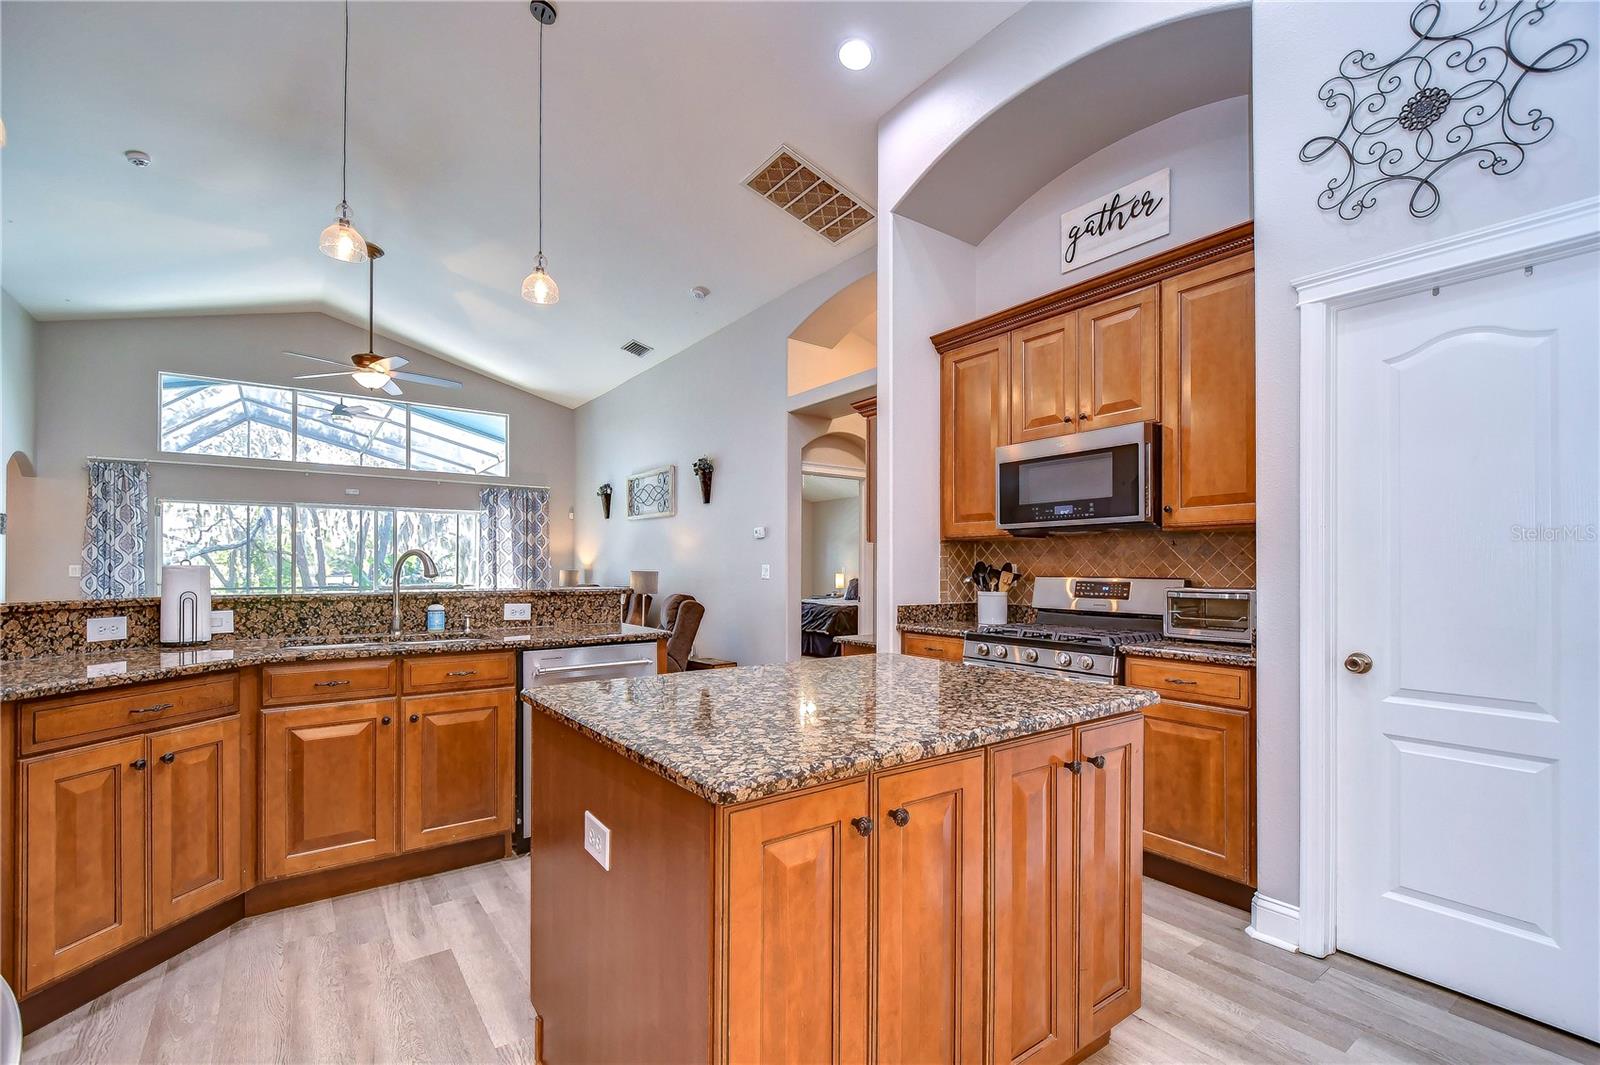 Rich wood cabinets topped with crown as well as a spacious walk-in pantry!